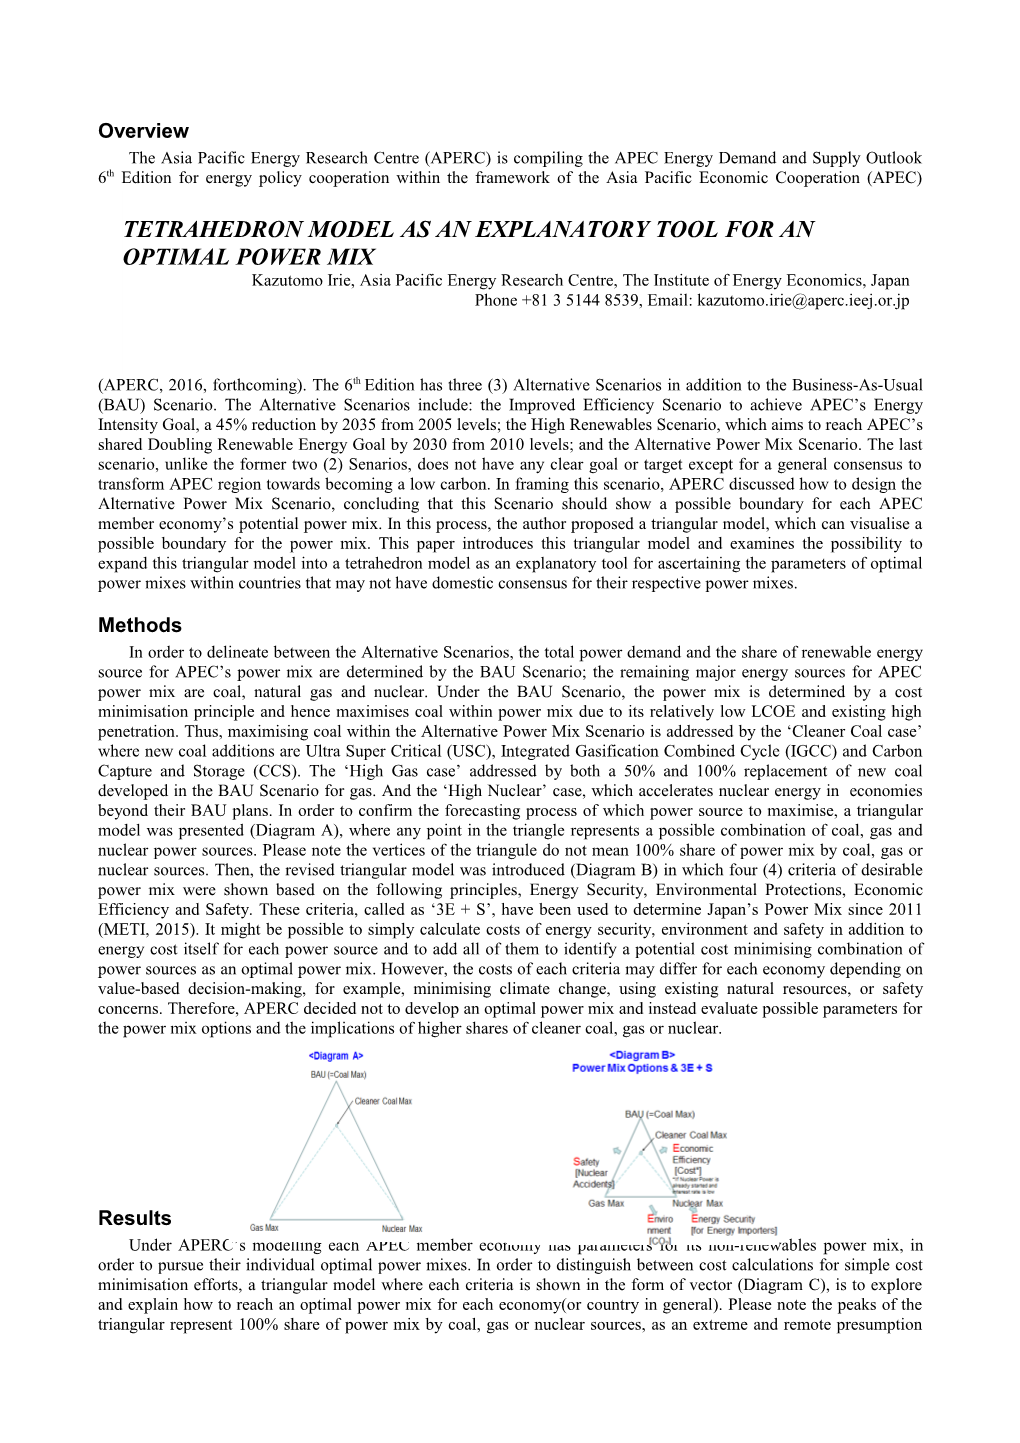 Tetrahedron Model As an Explanatory Tool for an Optimal Power Mix